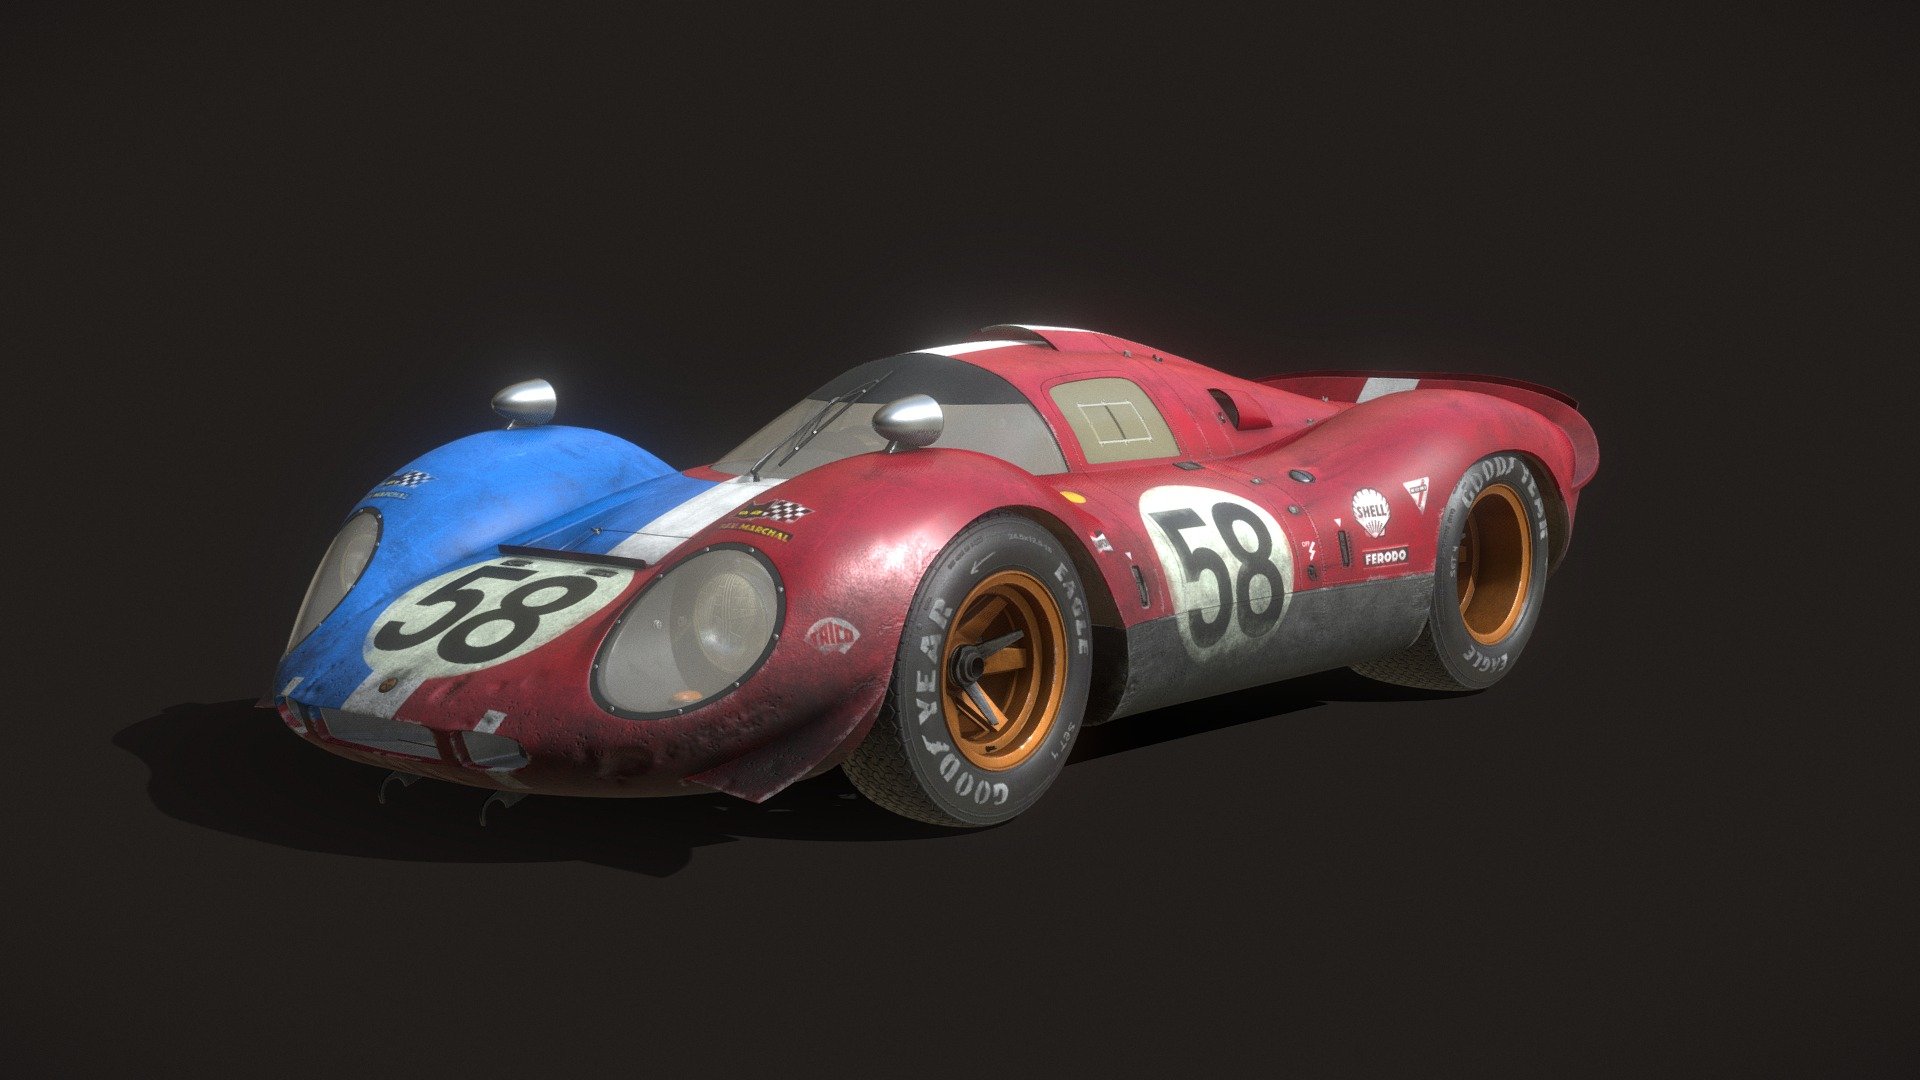 This car was a lot of fun to design and create and I really loved the challenge of combining all the parts together. I am a huge fan of the old GTs and Prototype cars that raced at Le Mans between the 1960s and 1970s, and this project was inspired by that. This is my most detailed personal project so far.

You can find the car disassembled for a closer look here:
https://sketchfab.com/3d-models/prototype-vintage-racecar-showroom-13db2793b75742b6b581603c4fb1b669

You can find some renders with the car here:
https://www.artstation.com/artwork/3dK9Qm - Prototype Vintage Racecar - 3D model by Todor Malakchiev (@todormalakchiev) 3d model